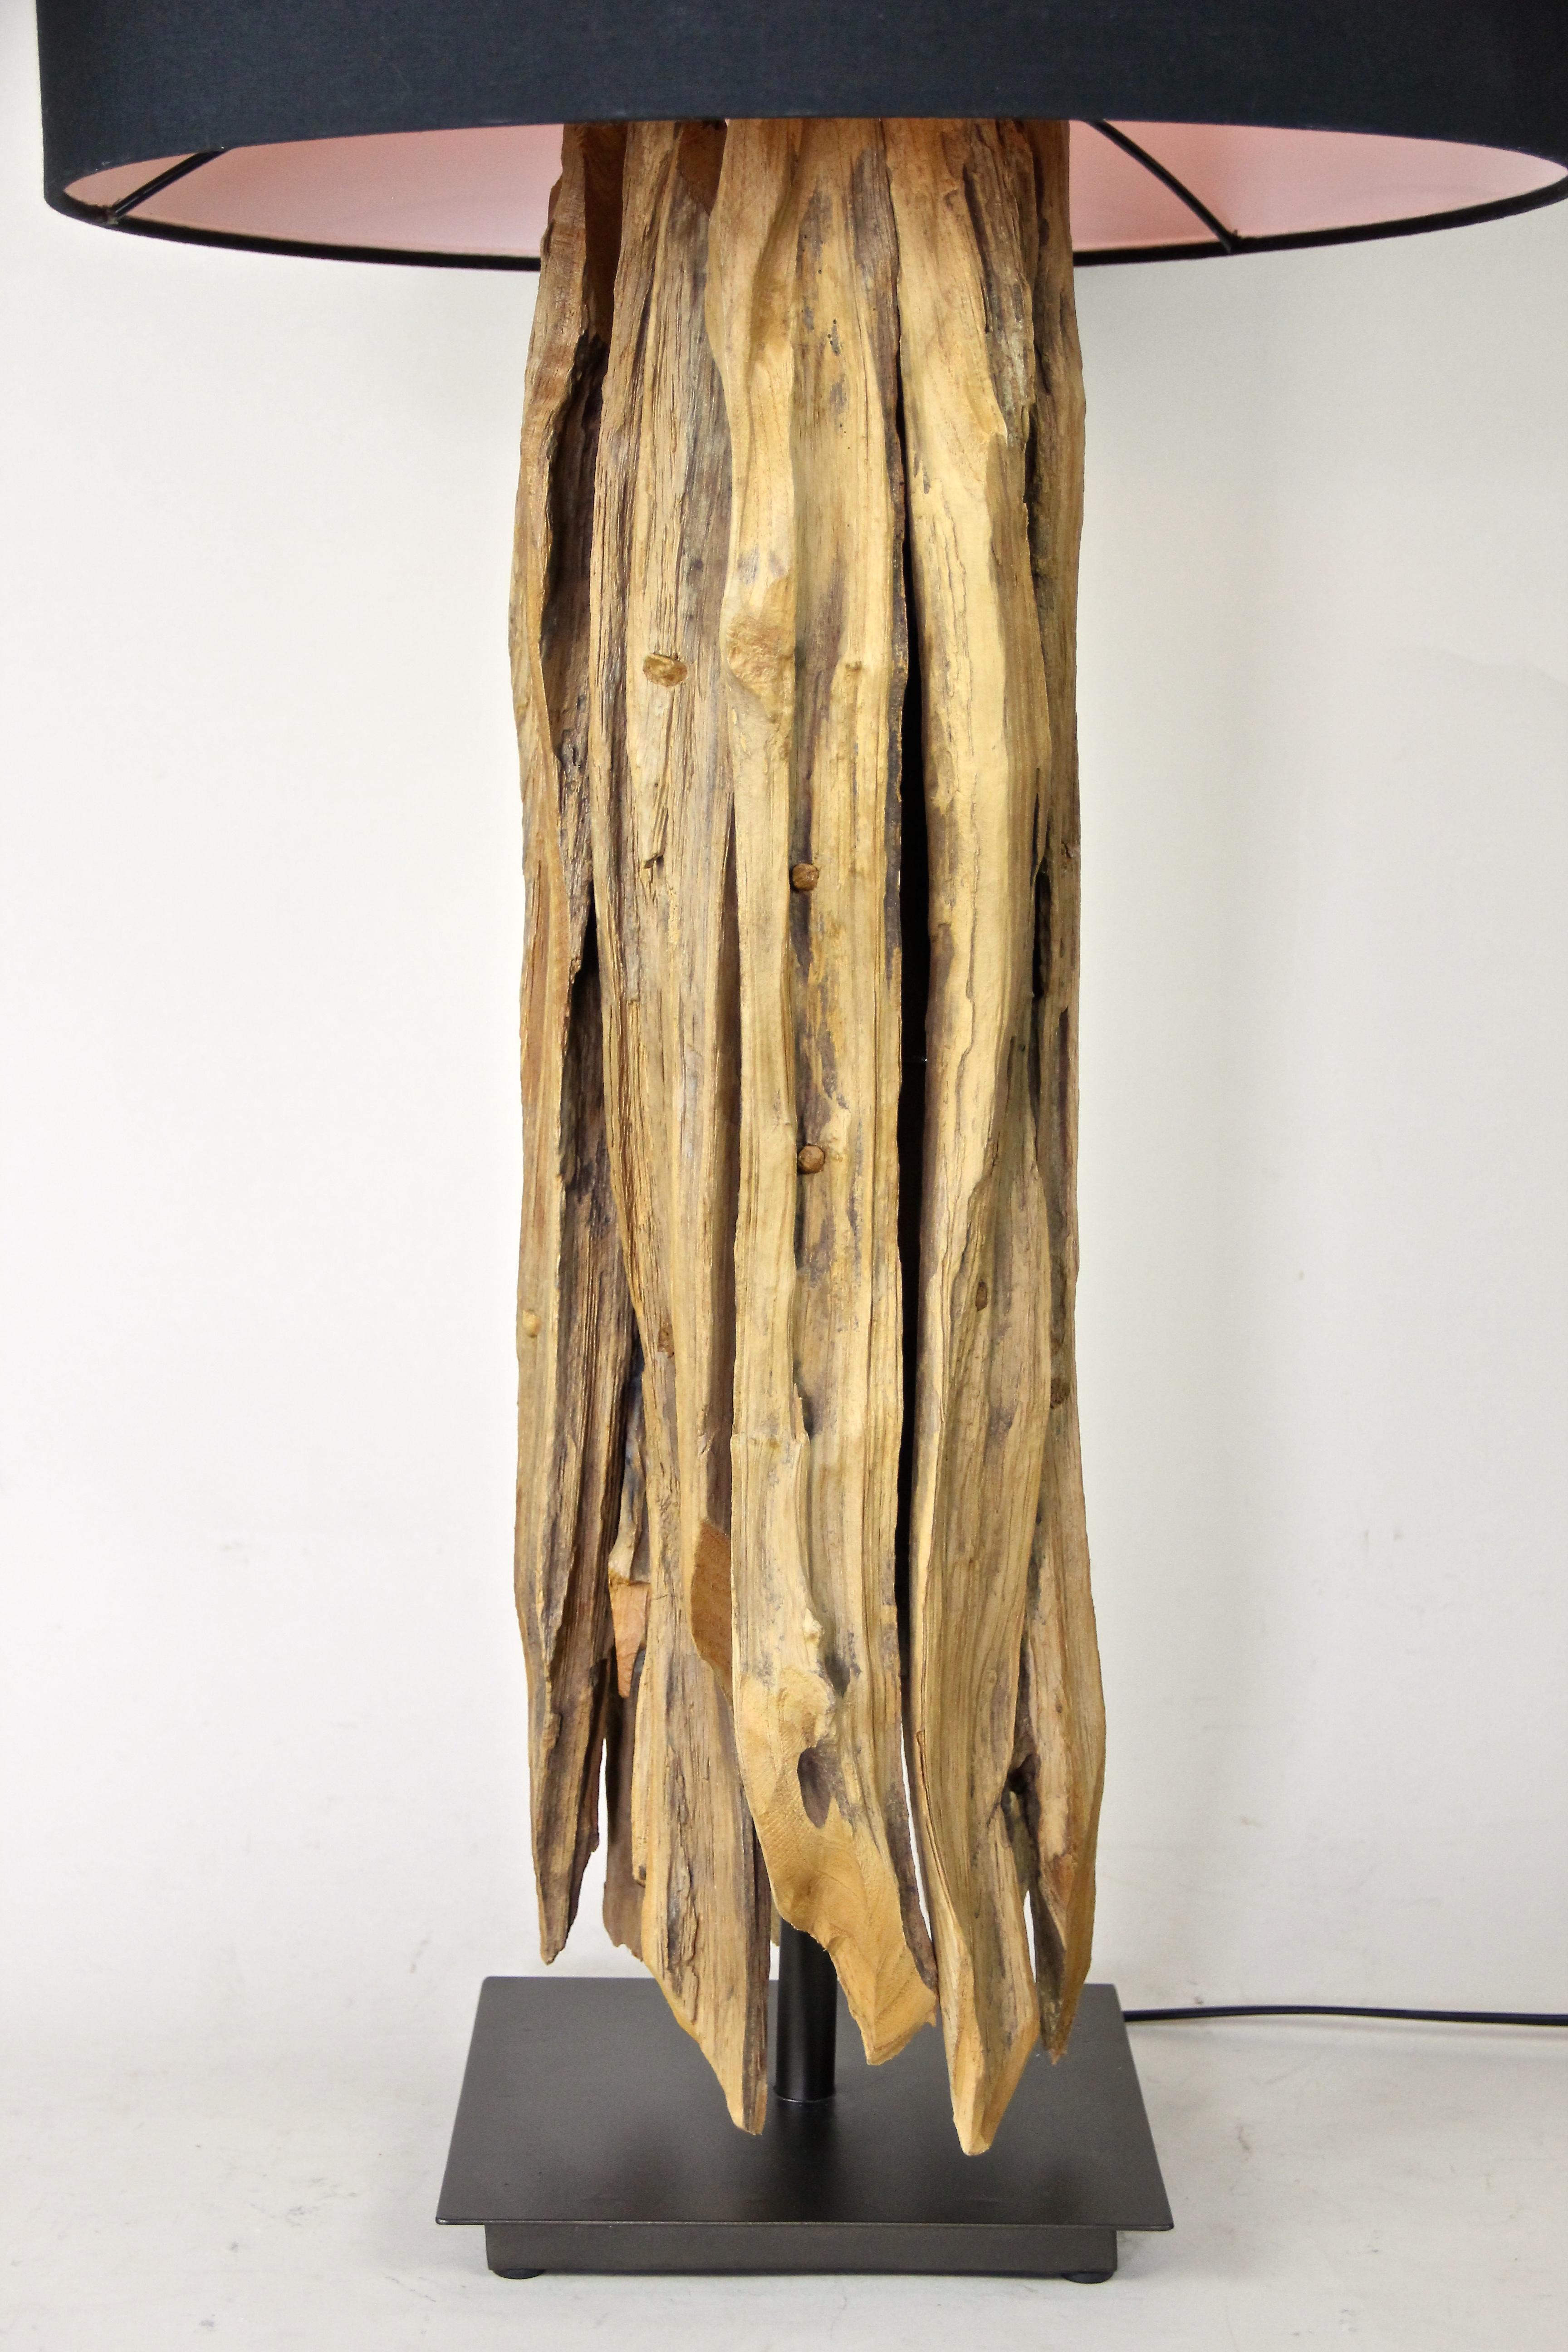 Charming organic modern table lamp with old driftwood and a round greyblue lampshade. Standing on a 8.7